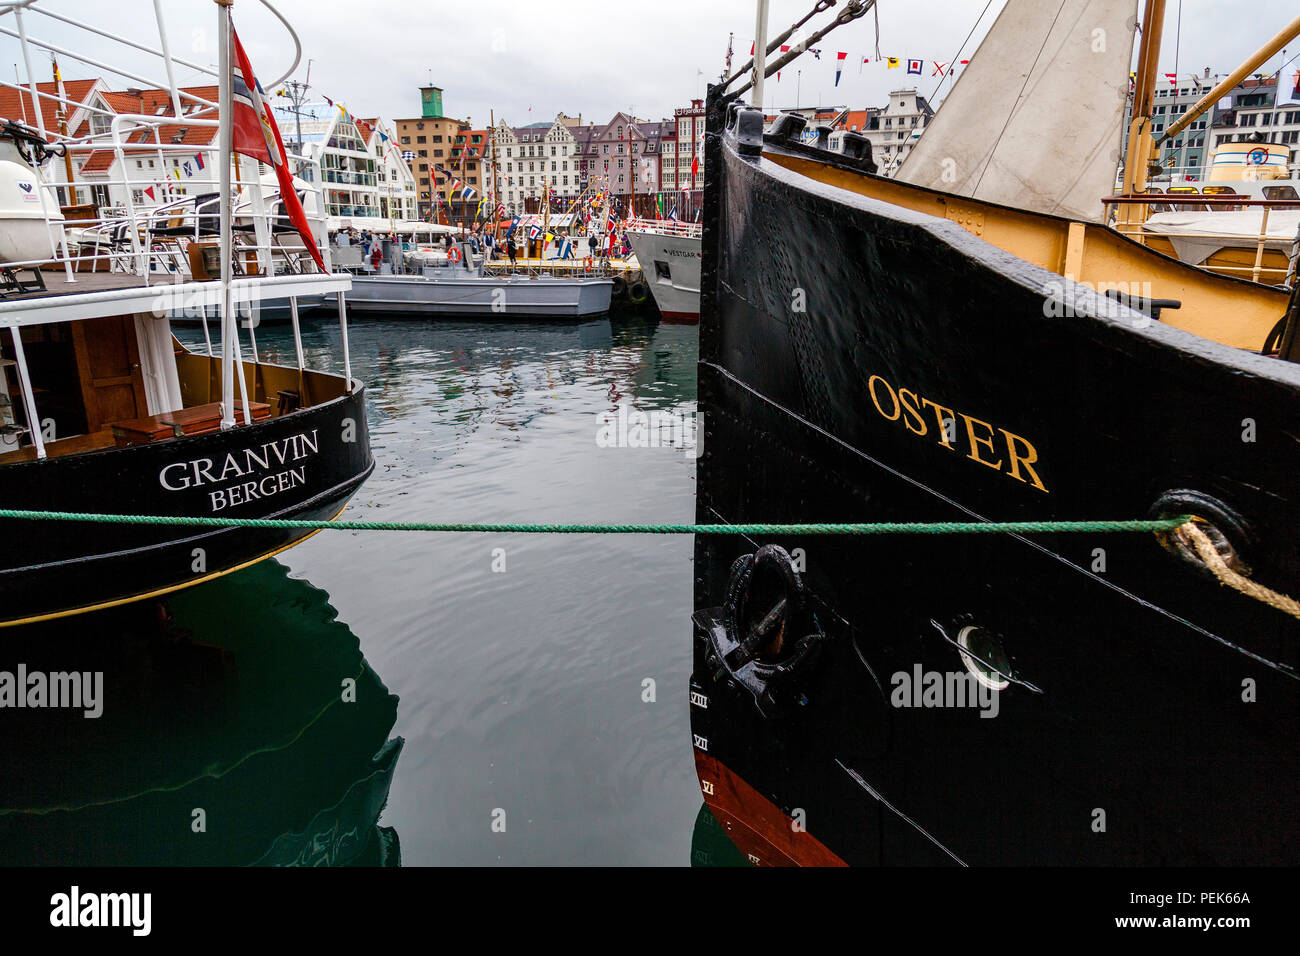 Two veteran passenger steam ships in the port of Bergen, Norway; bow of Oster (b.1908) and stern of Granvin (b.1931) Fjordsteam 2018 Stock Photo